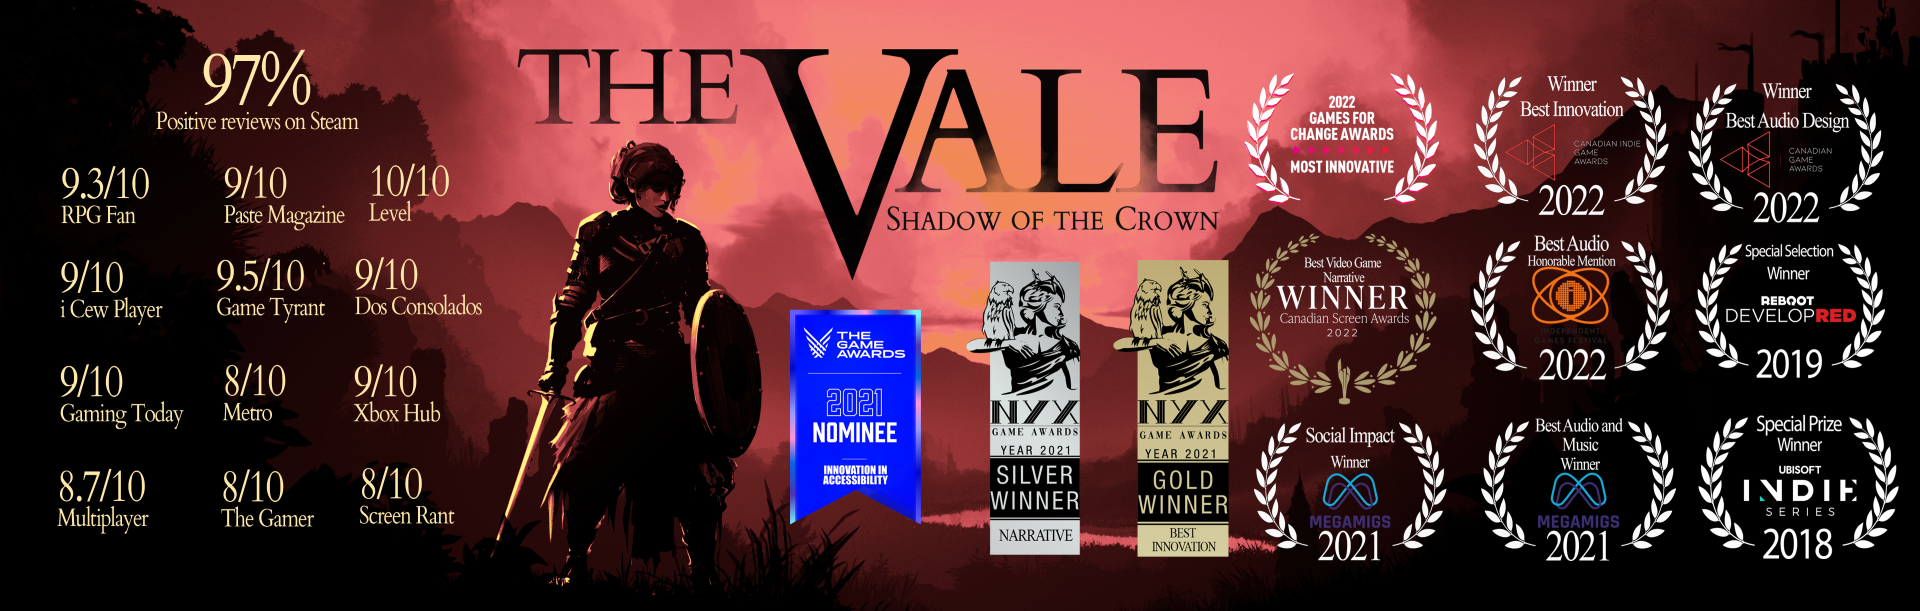 game-update-the-vale-shadow-of-the-crown-by-falling-squirrel-falling-squirrel-dev